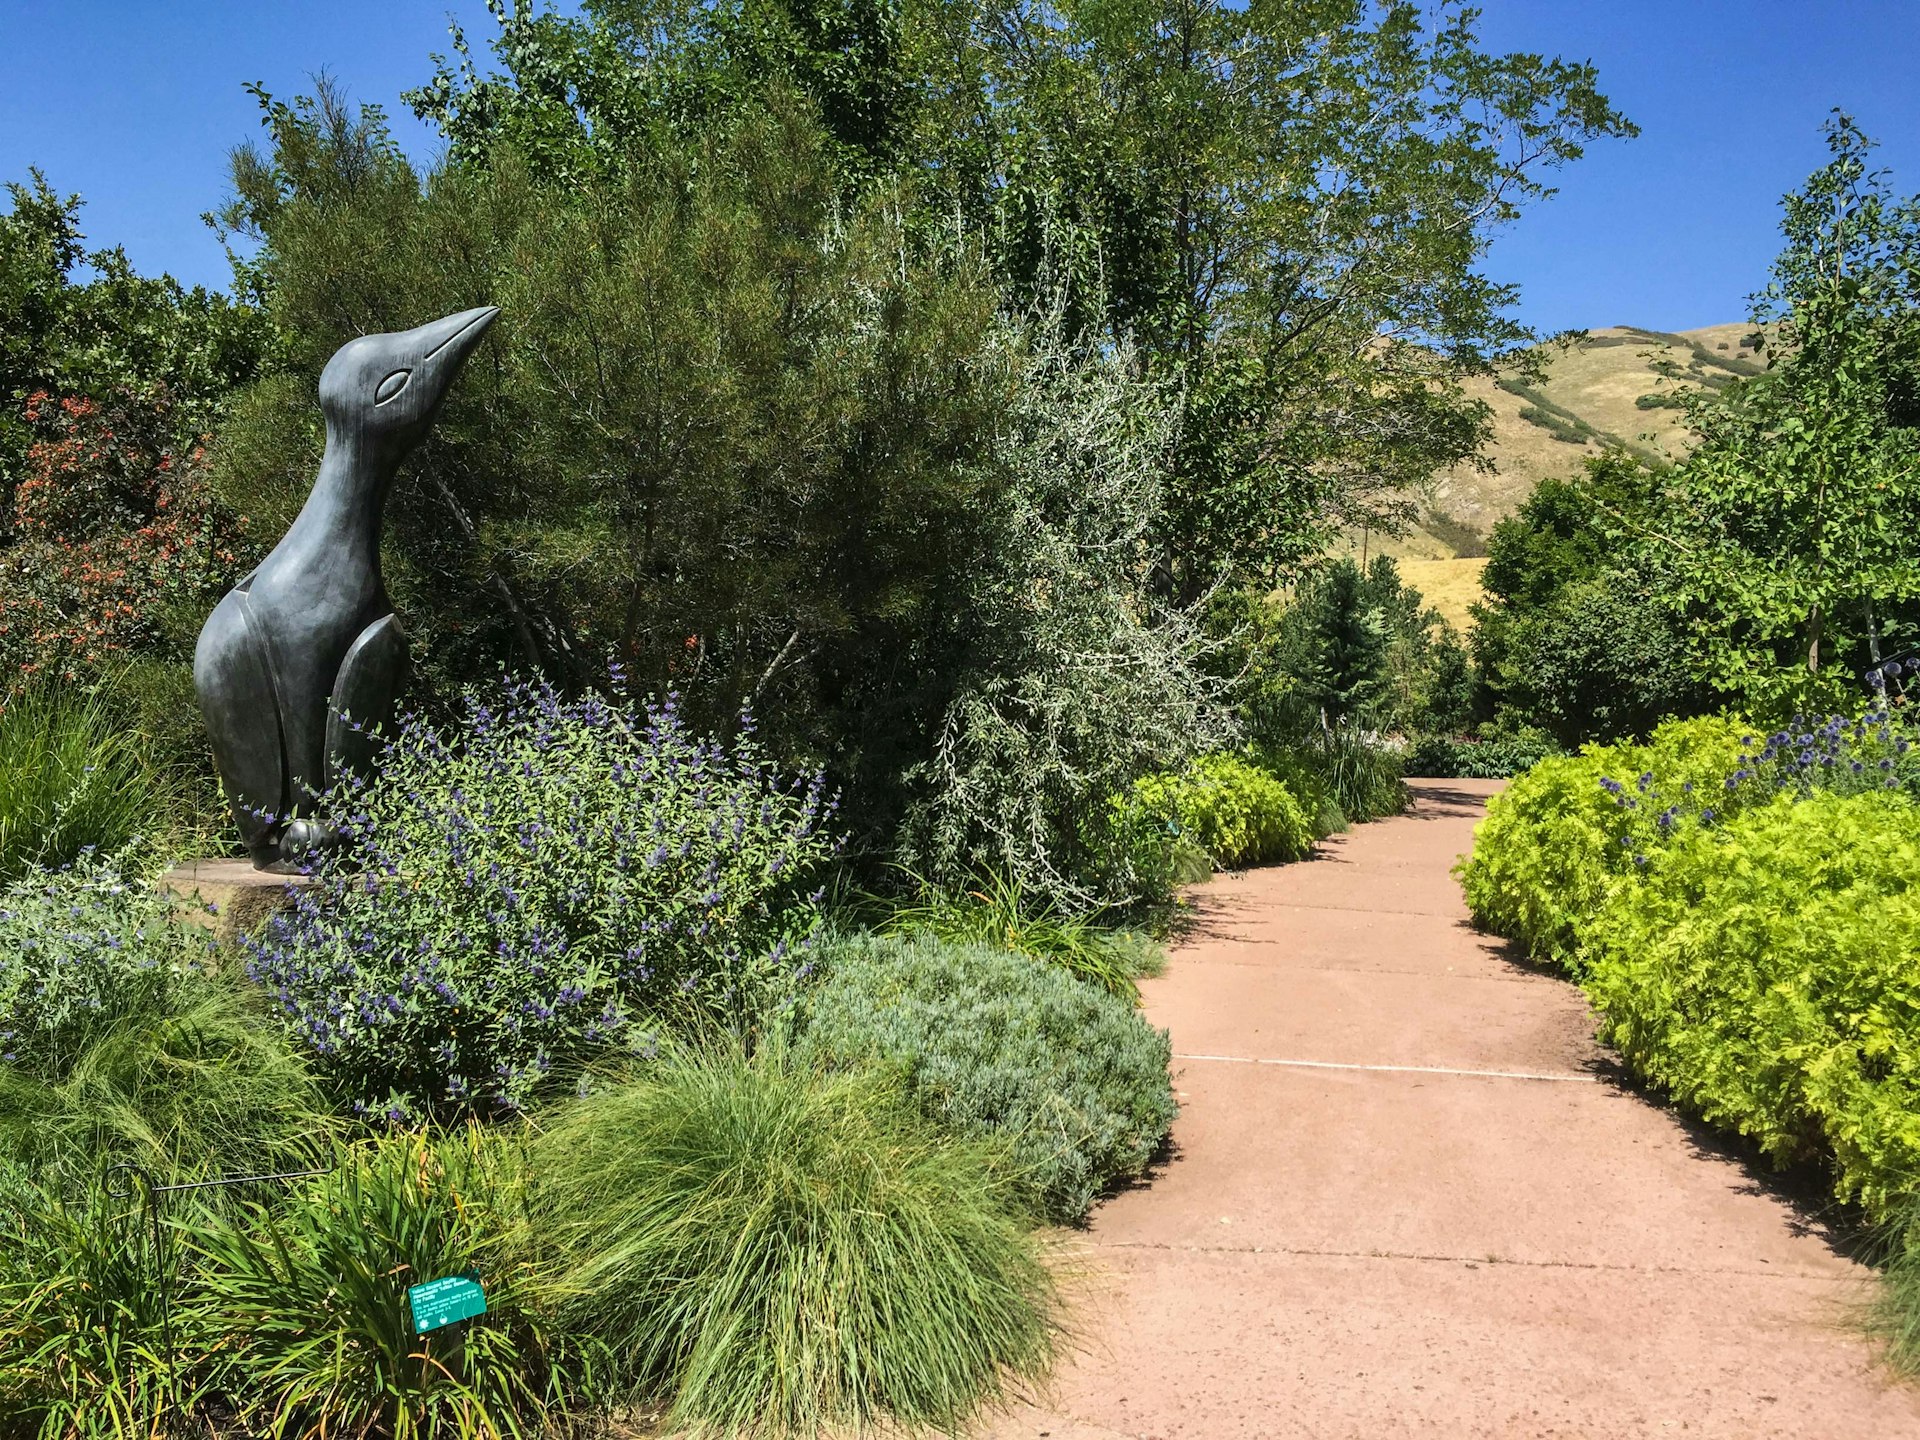 Open year-round, Red Butte Garden provides a quick natural getaway from the bustle of downtown. Image by Kerry Christiani / Lonely Planet